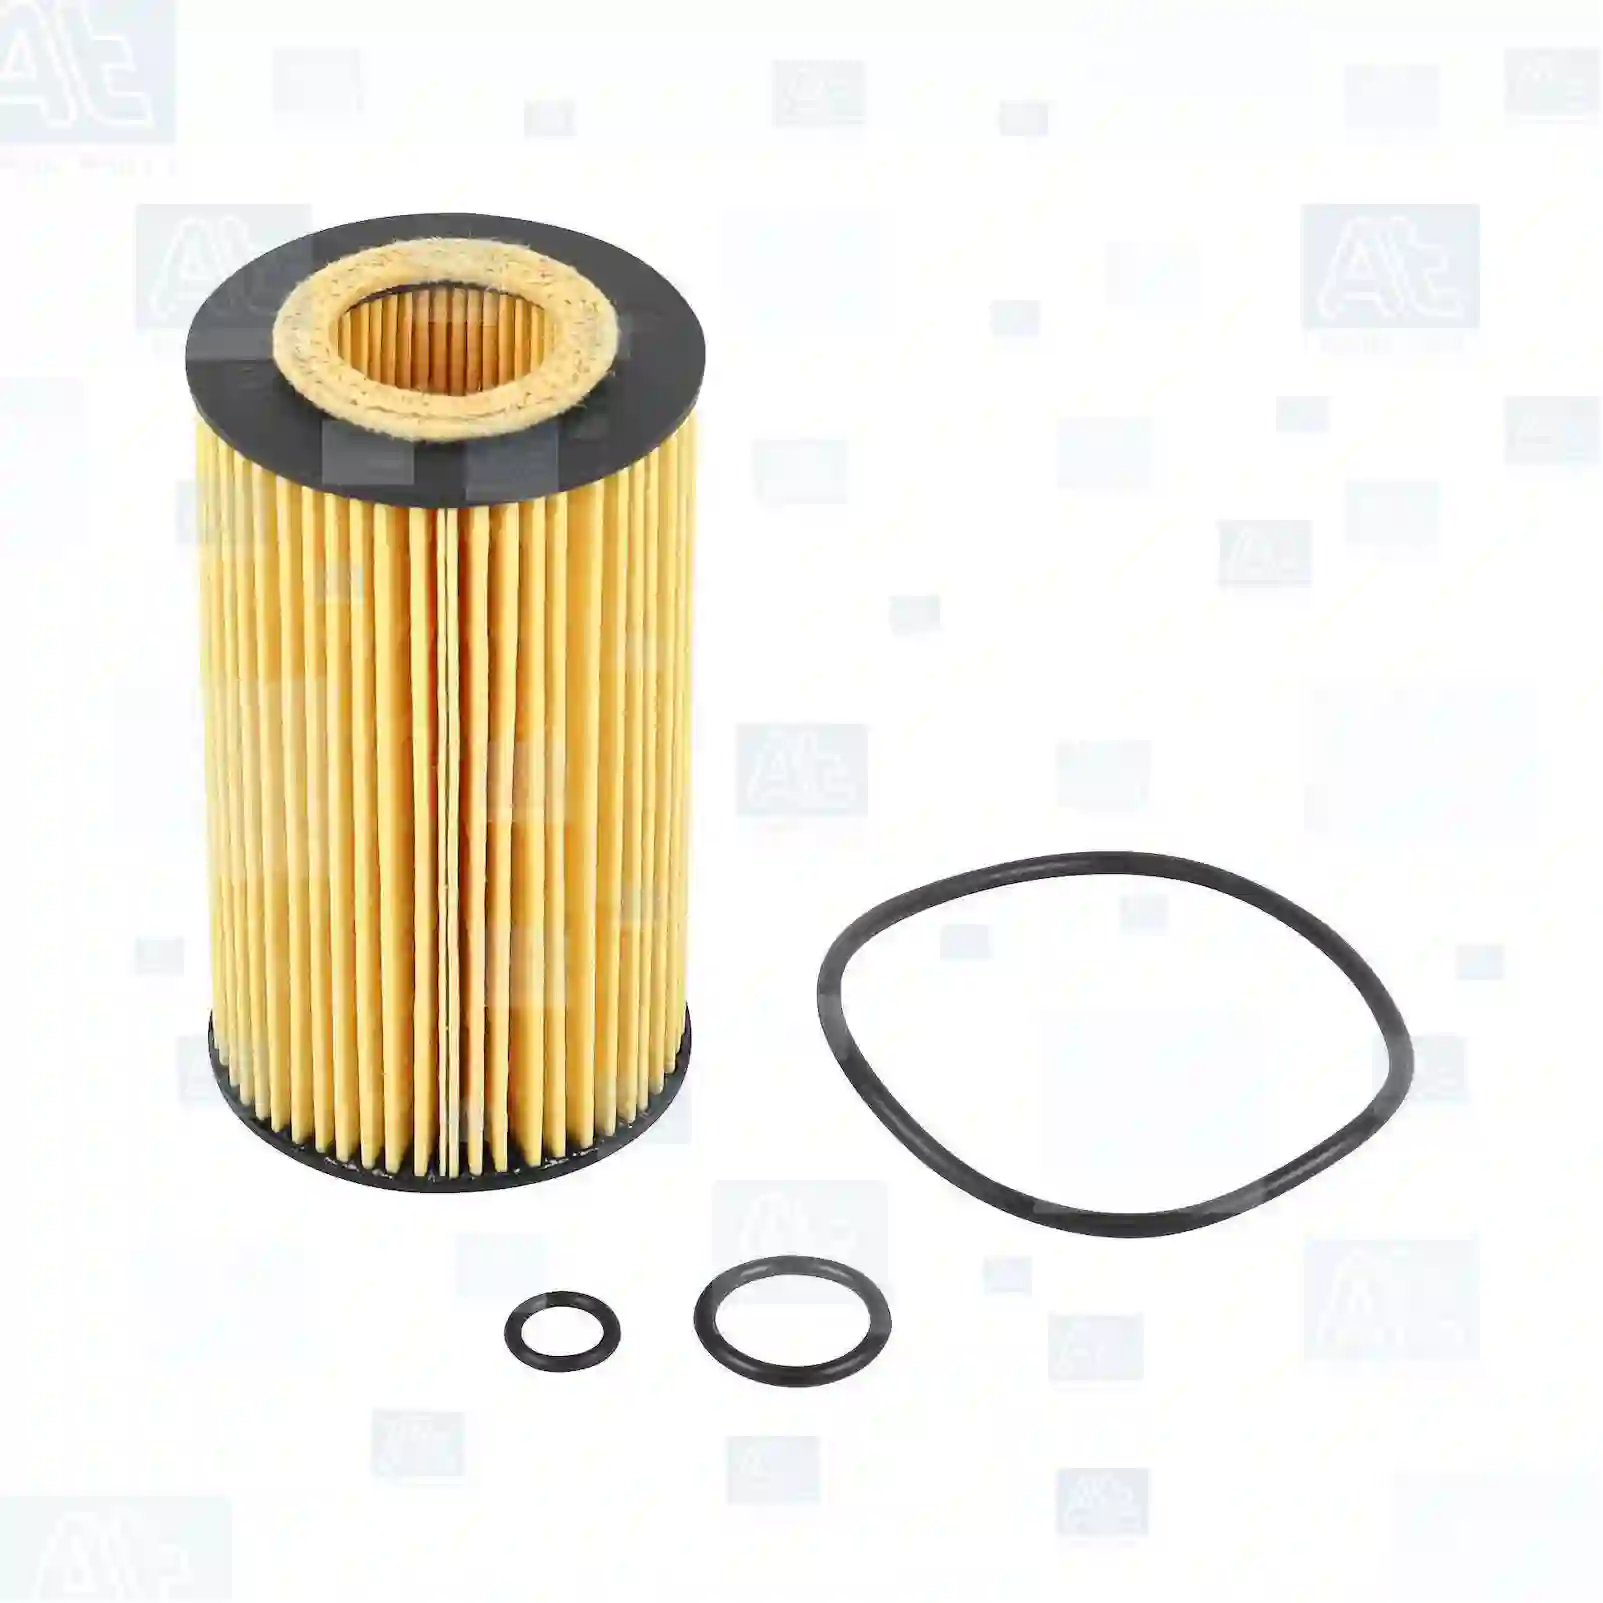 Oil filter insert, at no 77702050, oem no: X625, 5080244AB, 5086301AA, 5102904AA, 5102905AA, 5102905AB, 51022905AA, 5143064AA, 5179103AA, 5183748AA, 71775180, K05102904AA, K05102905AA, K05102905AB, K05143064AA, 5086301AA, 5102905AB, 42540021A, 5086301AA, 5102905AB, 0001802209, 0001802309, 0001802609, 0001803009, 0001803109, 0001803309, 1121800009, 112180000967, 1121840025, 1121840125, 1121840225, 1121840325, 1121840525, 6111800009, 611180000967, 6111800010, 6111800110, 6111800210, 6641800009, 1121800009 At Spare Part | Engine, Accelerator Pedal, Camshaft, Connecting Rod, Crankcase, Crankshaft, Cylinder Head, Engine Suspension Mountings, Exhaust Manifold, Exhaust Gas Recirculation, Filter Kits, Flywheel Housing, General Overhaul Kits, Engine, Intake Manifold, Oil Cleaner, Oil Cooler, Oil Filter, Oil Pump, Oil Sump, Piston & Liner, Sensor & Switch, Timing Case, Turbocharger, Cooling System, Belt Tensioner, Coolant Filter, Coolant Pipe, Corrosion Prevention Agent, Drive, Expansion Tank, Fan, Intercooler, Monitors & Gauges, Radiator, Thermostat, V-Belt / Timing belt, Water Pump, Fuel System, Electronical Injector Unit, Feed Pump, Fuel Filter, cpl., Fuel Gauge Sender,  Fuel Line, Fuel Pump, Fuel Tank, Injection Line Kit, Injection Pump, Exhaust System, Clutch & Pedal, Gearbox, Propeller Shaft, Axles, Brake System, Hubs & Wheels, Suspension, Leaf Spring, Universal Parts / Accessories, Steering, Electrical System, Cabin Oil filter insert, at no 77702050, oem no: X625, 5080244AB, 5086301AA, 5102904AA, 5102905AA, 5102905AB, 51022905AA, 5143064AA, 5179103AA, 5183748AA, 71775180, K05102904AA, K05102905AA, K05102905AB, K05143064AA, 5086301AA, 5102905AB, 42540021A, 5086301AA, 5102905AB, 0001802209, 0001802309, 0001802609, 0001803009, 0001803109, 0001803309, 1121800009, 112180000967, 1121840025, 1121840125, 1121840225, 1121840325, 1121840525, 6111800009, 611180000967, 6111800010, 6111800110, 6111800210, 6641800009, 1121800009 At Spare Part | Engine, Accelerator Pedal, Camshaft, Connecting Rod, Crankcase, Crankshaft, Cylinder Head, Engine Suspension Mountings, Exhaust Manifold, Exhaust Gas Recirculation, Filter Kits, Flywheel Housing, General Overhaul Kits, Engine, Intake Manifold, Oil Cleaner, Oil Cooler, Oil Filter, Oil Pump, Oil Sump, Piston & Liner, Sensor & Switch, Timing Case, Turbocharger, Cooling System, Belt Tensioner, Coolant Filter, Coolant Pipe, Corrosion Prevention Agent, Drive, Expansion Tank, Fan, Intercooler, Monitors & Gauges, Radiator, Thermostat, V-Belt / Timing belt, Water Pump, Fuel System, Electronical Injector Unit, Feed Pump, Fuel Filter, cpl., Fuel Gauge Sender,  Fuel Line, Fuel Pump, Fuel Tank, Injection Line Kit, Injection Pump, Exhaust System, Clutch & Pedal, Gearbox, Propeller Shaft, Axles, Brake System, Hubs & Wheels, Suspension, Leaf Spring, Universal Parts / Accessories, Steering, Electrical System, Cabin